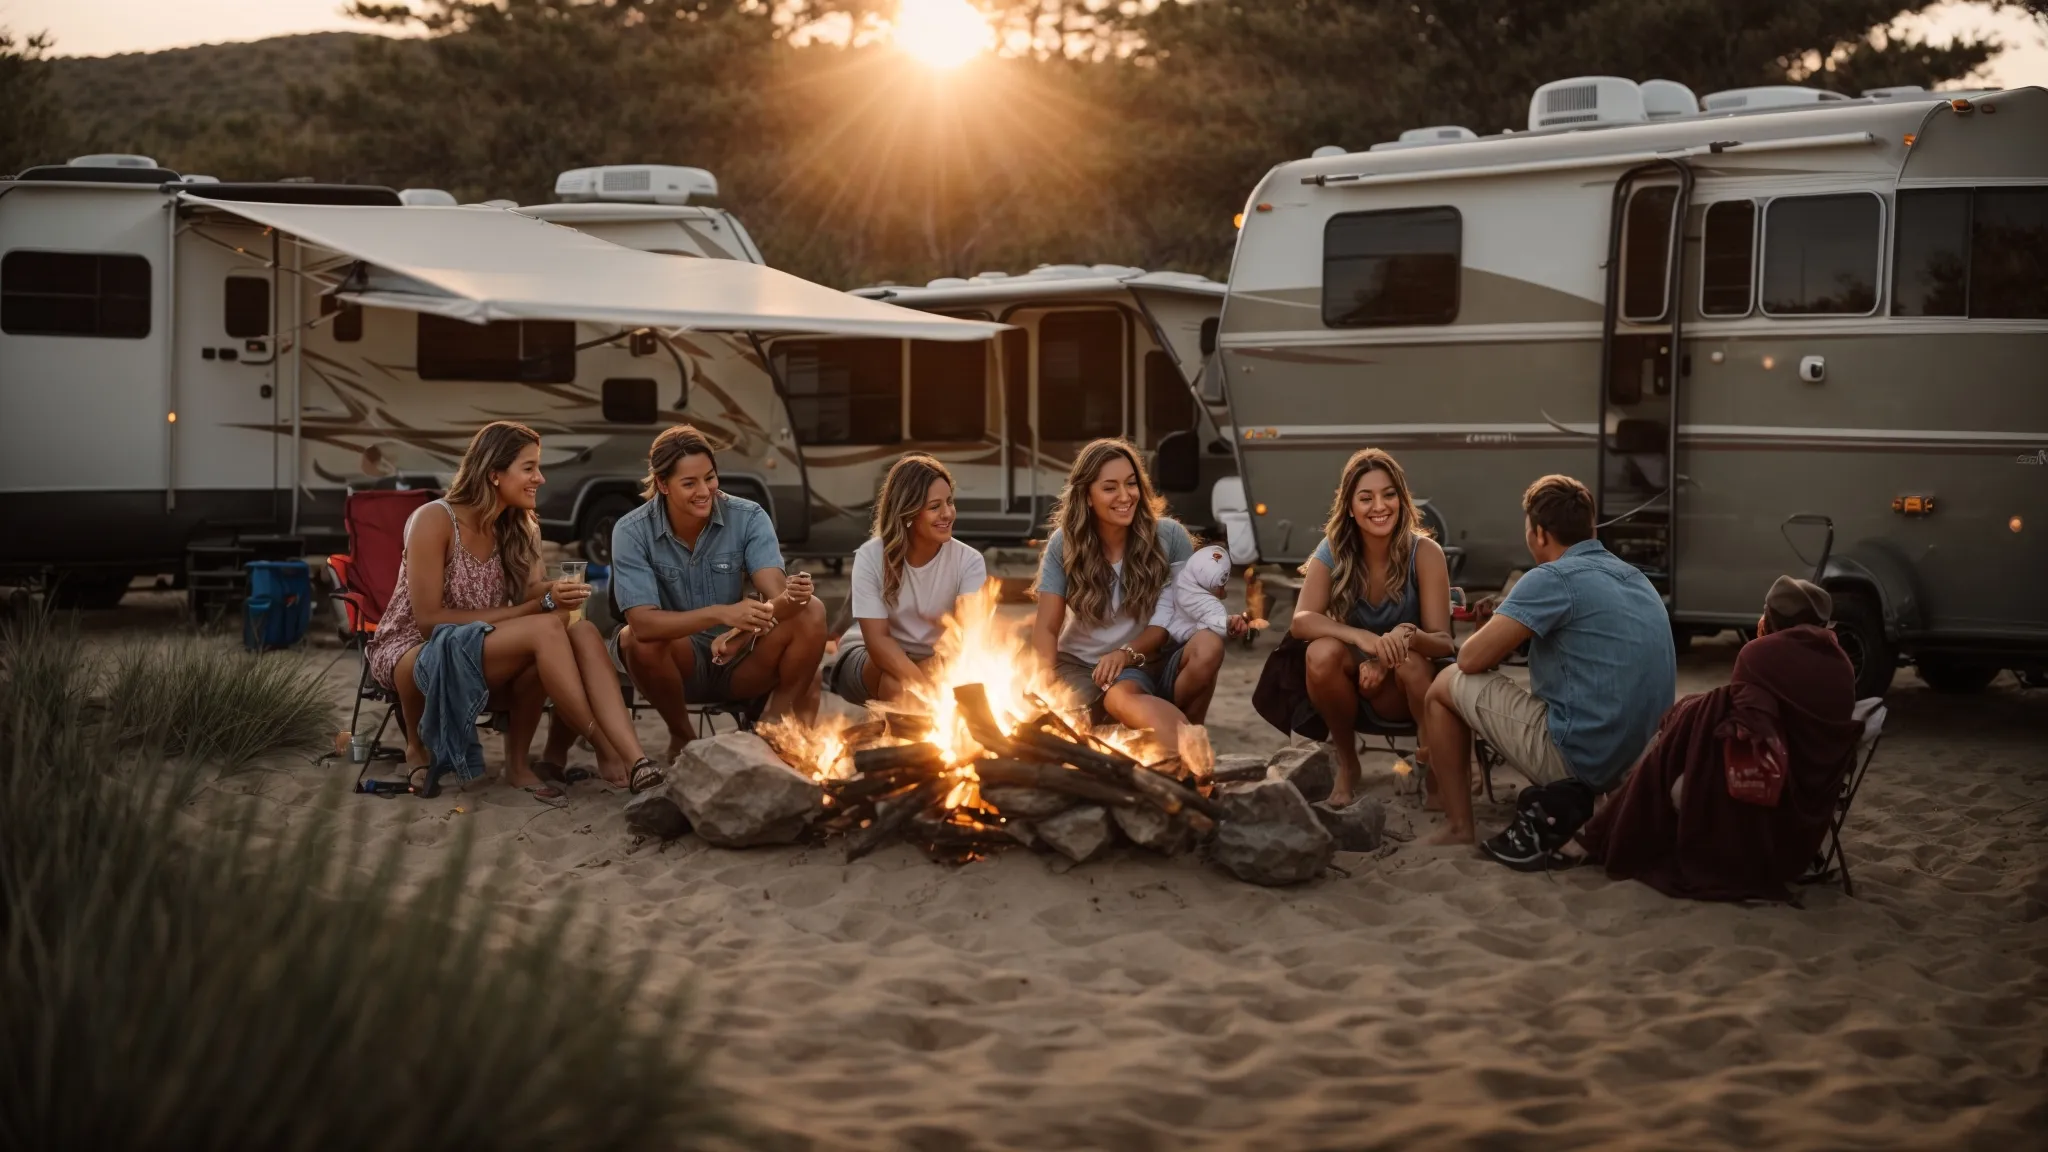 a family gathers around a campfire at an rv campground near the beach as the sun sets.